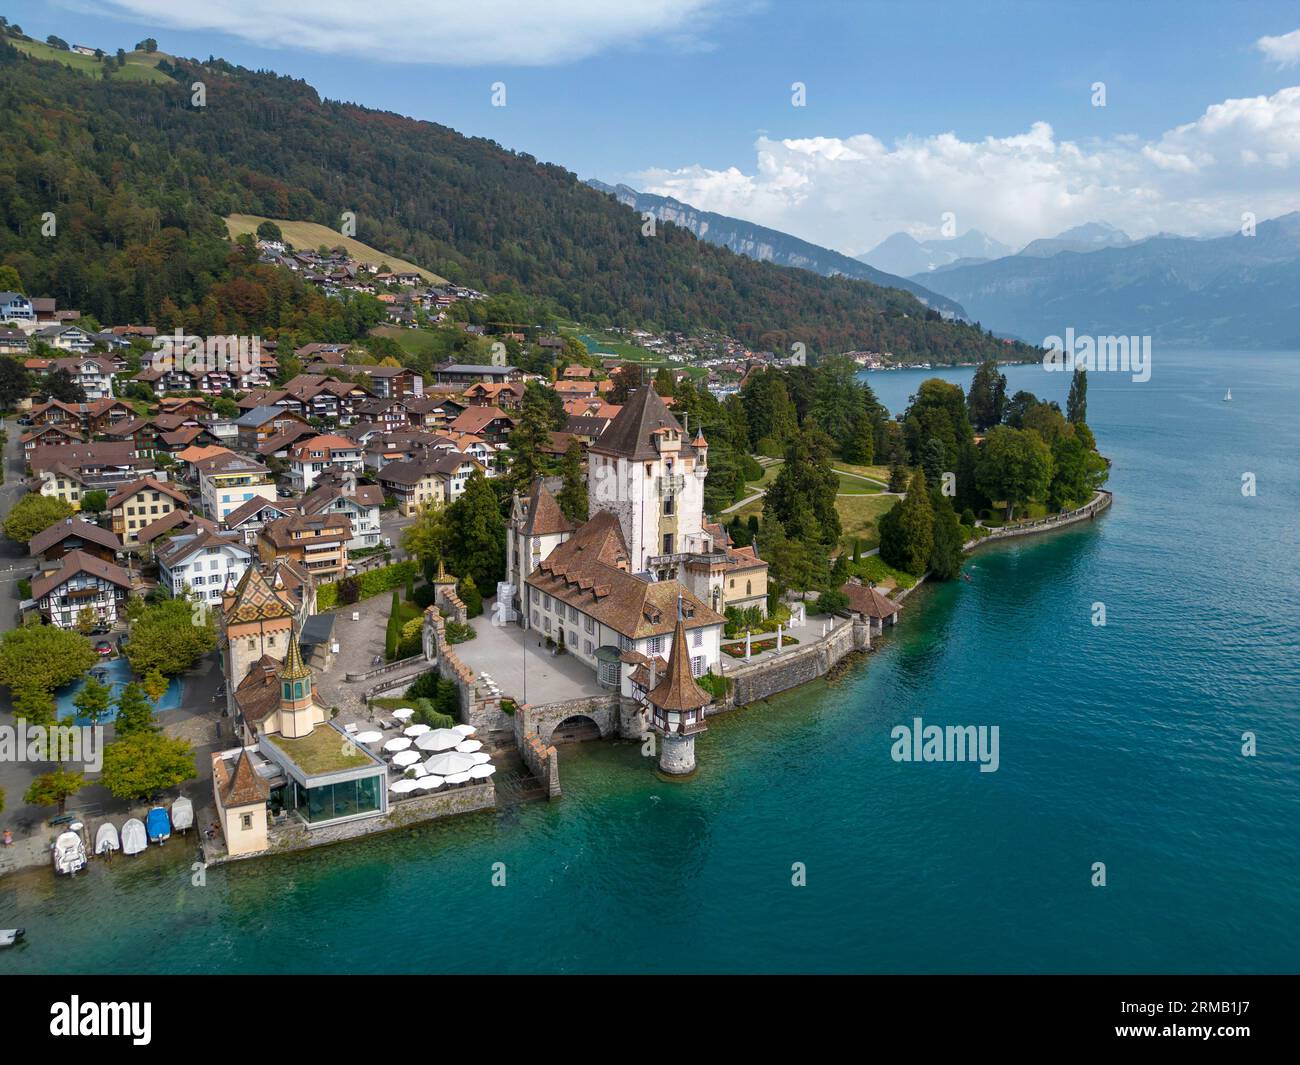 Aerial view of Oberhofen Castle on the shore of Lake Thun, Canton of Bern, Switzerland. Stock Photo